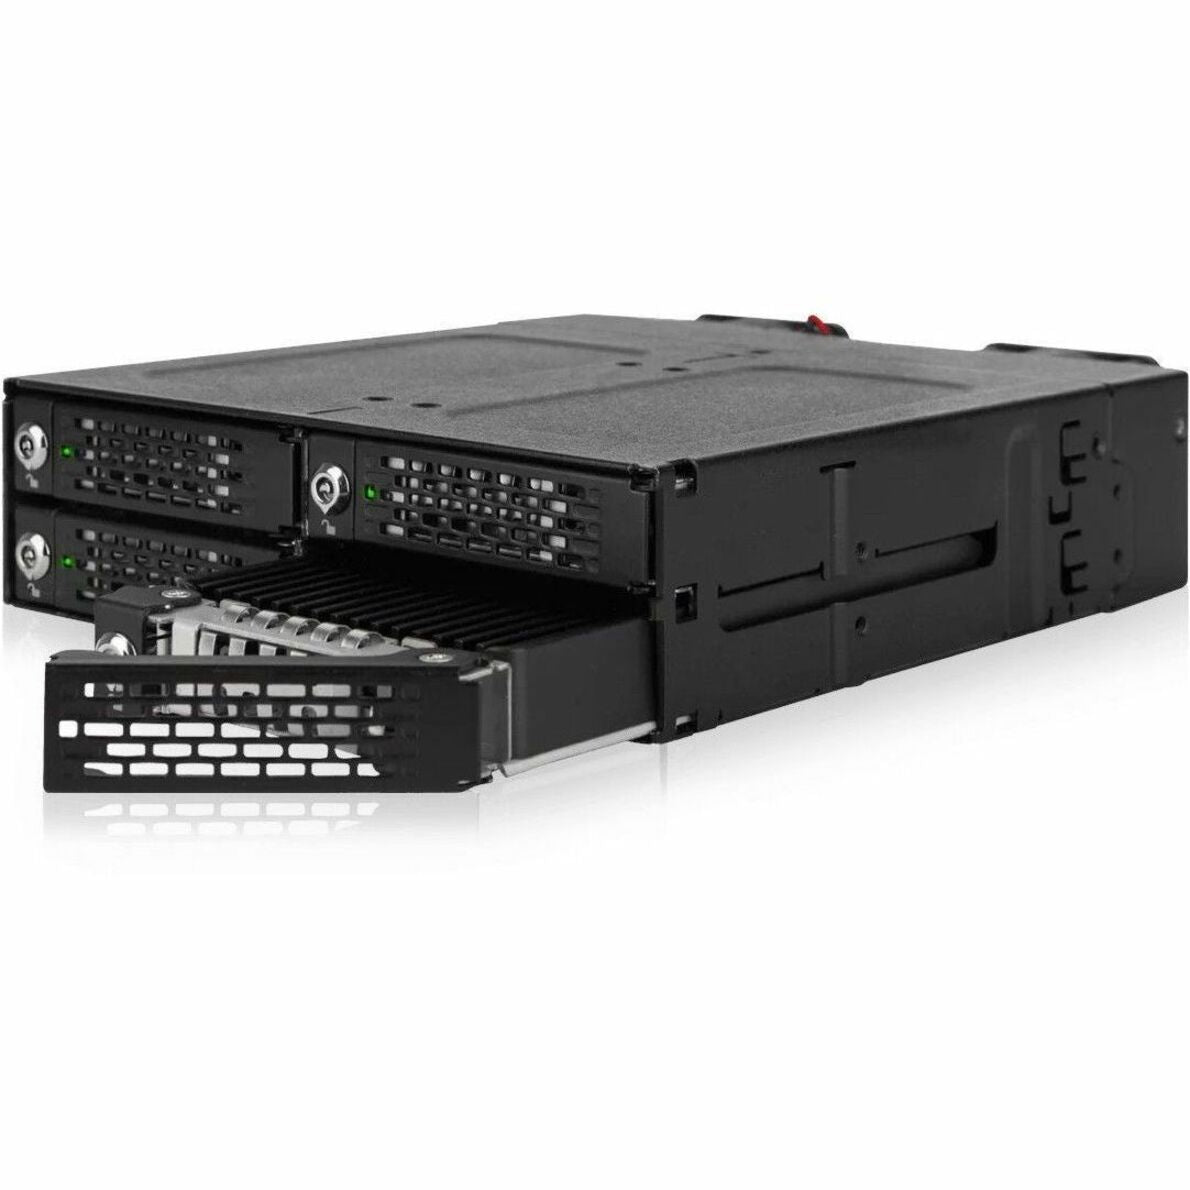 Icy Dock MB720MK-B V3 4 Bay M.2 NVMe SSD PCIe 4.0 Mobile Rack Enclosure for External 5.25" Drive Bay, 5 Year Warranty, RoHS Certified